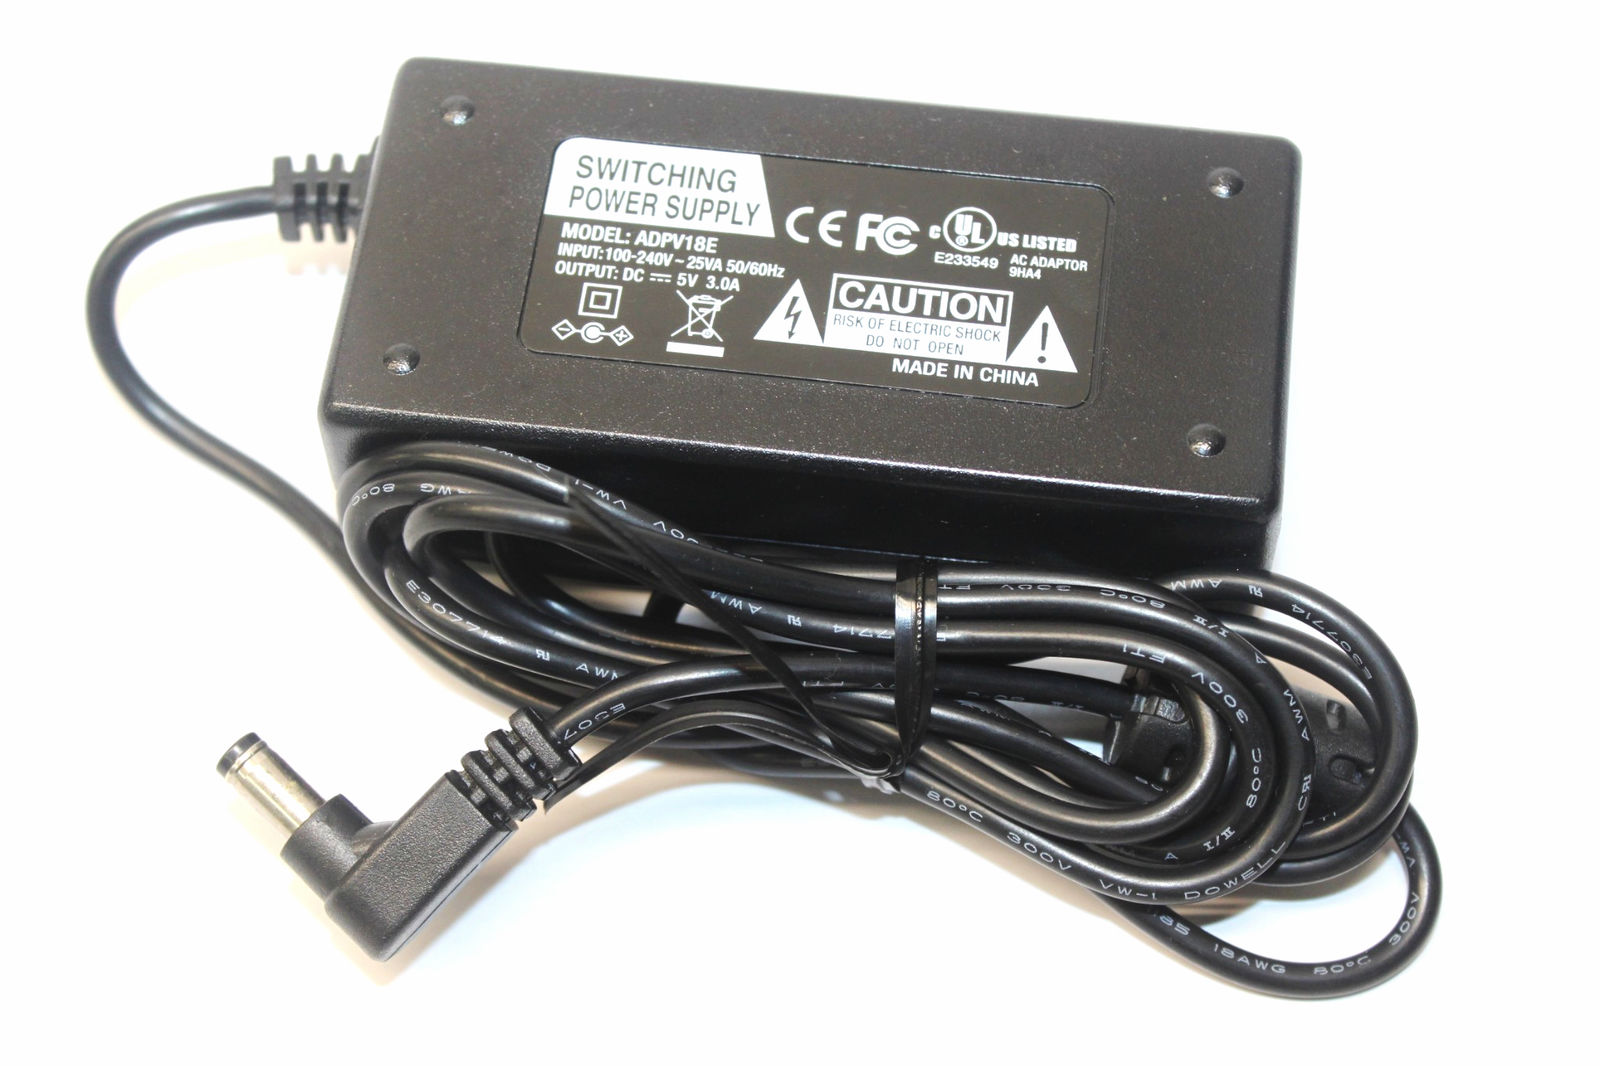 New 5V 3A ADPV18E Switching Power Supply Ac Adapter